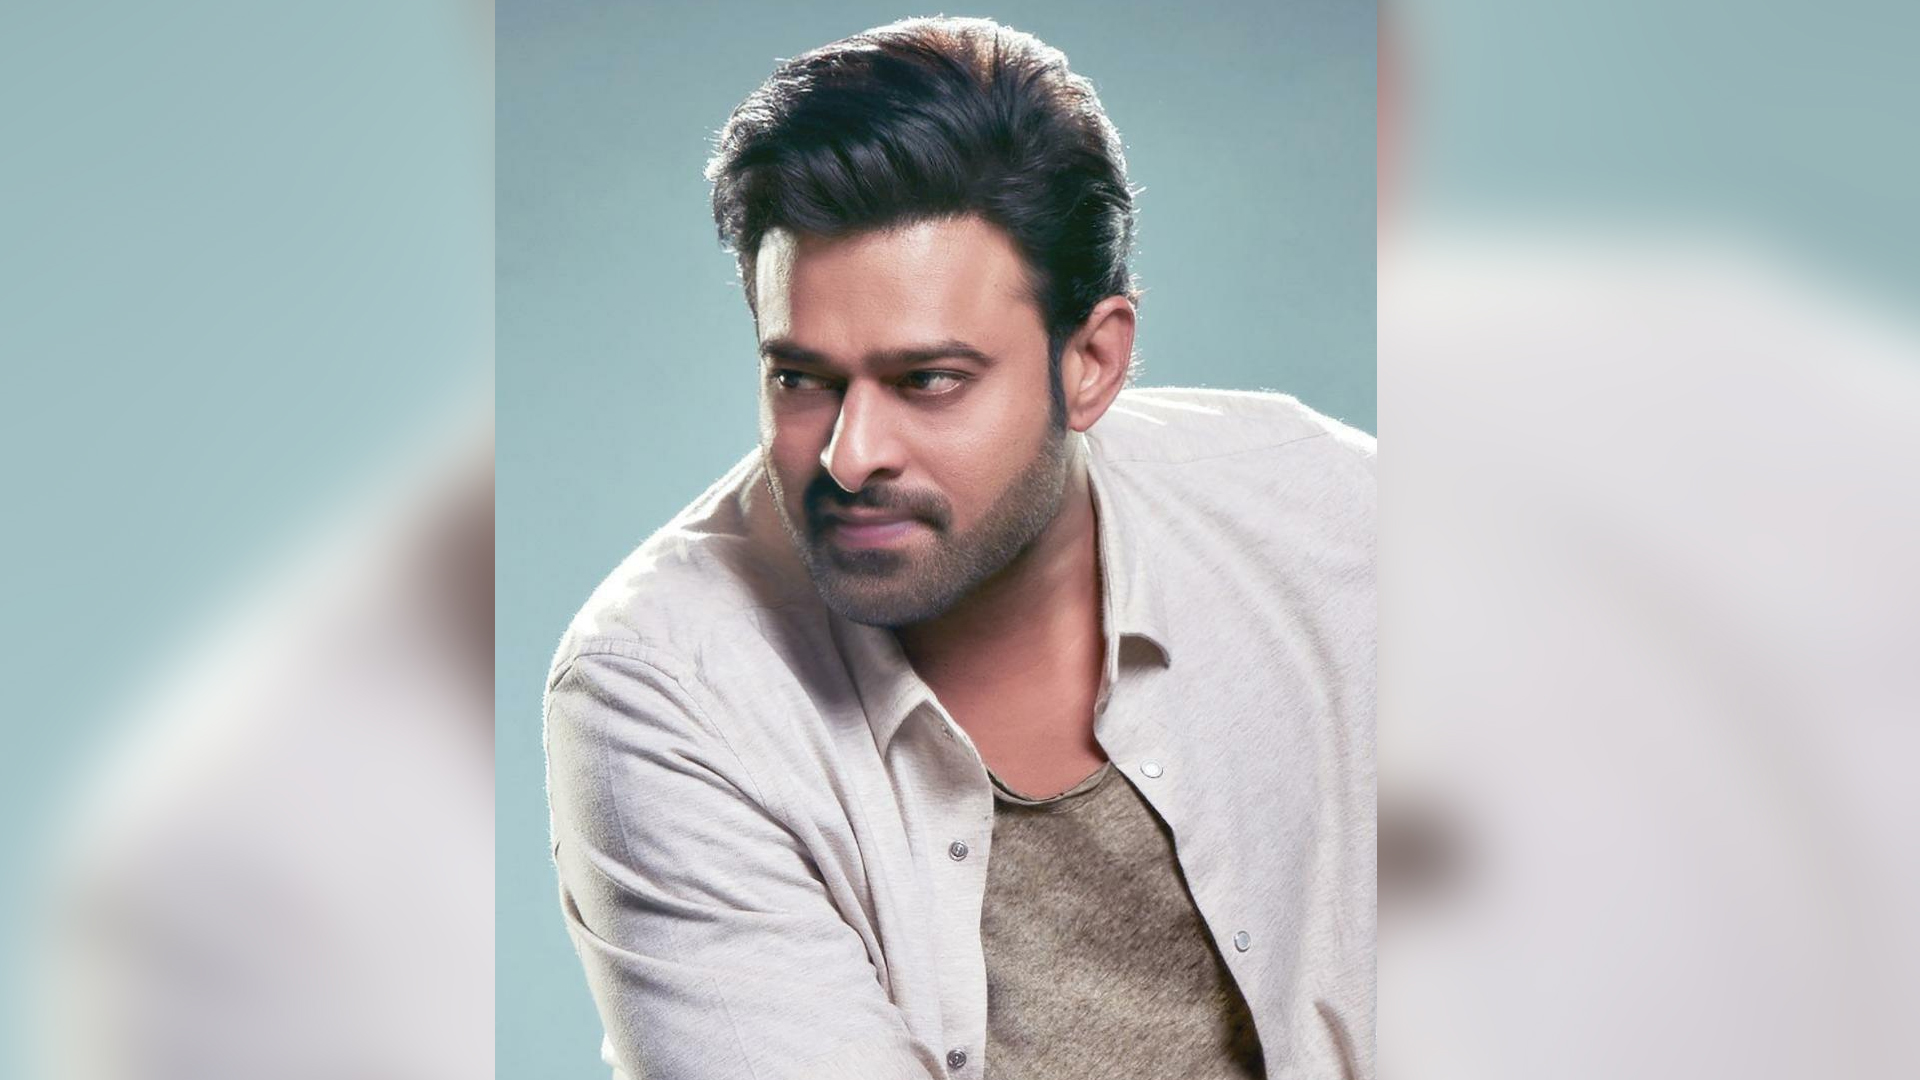 Eyeing to make a difference and grow as an artist, here’s how Prabhas has been spending time on his artistry and craft